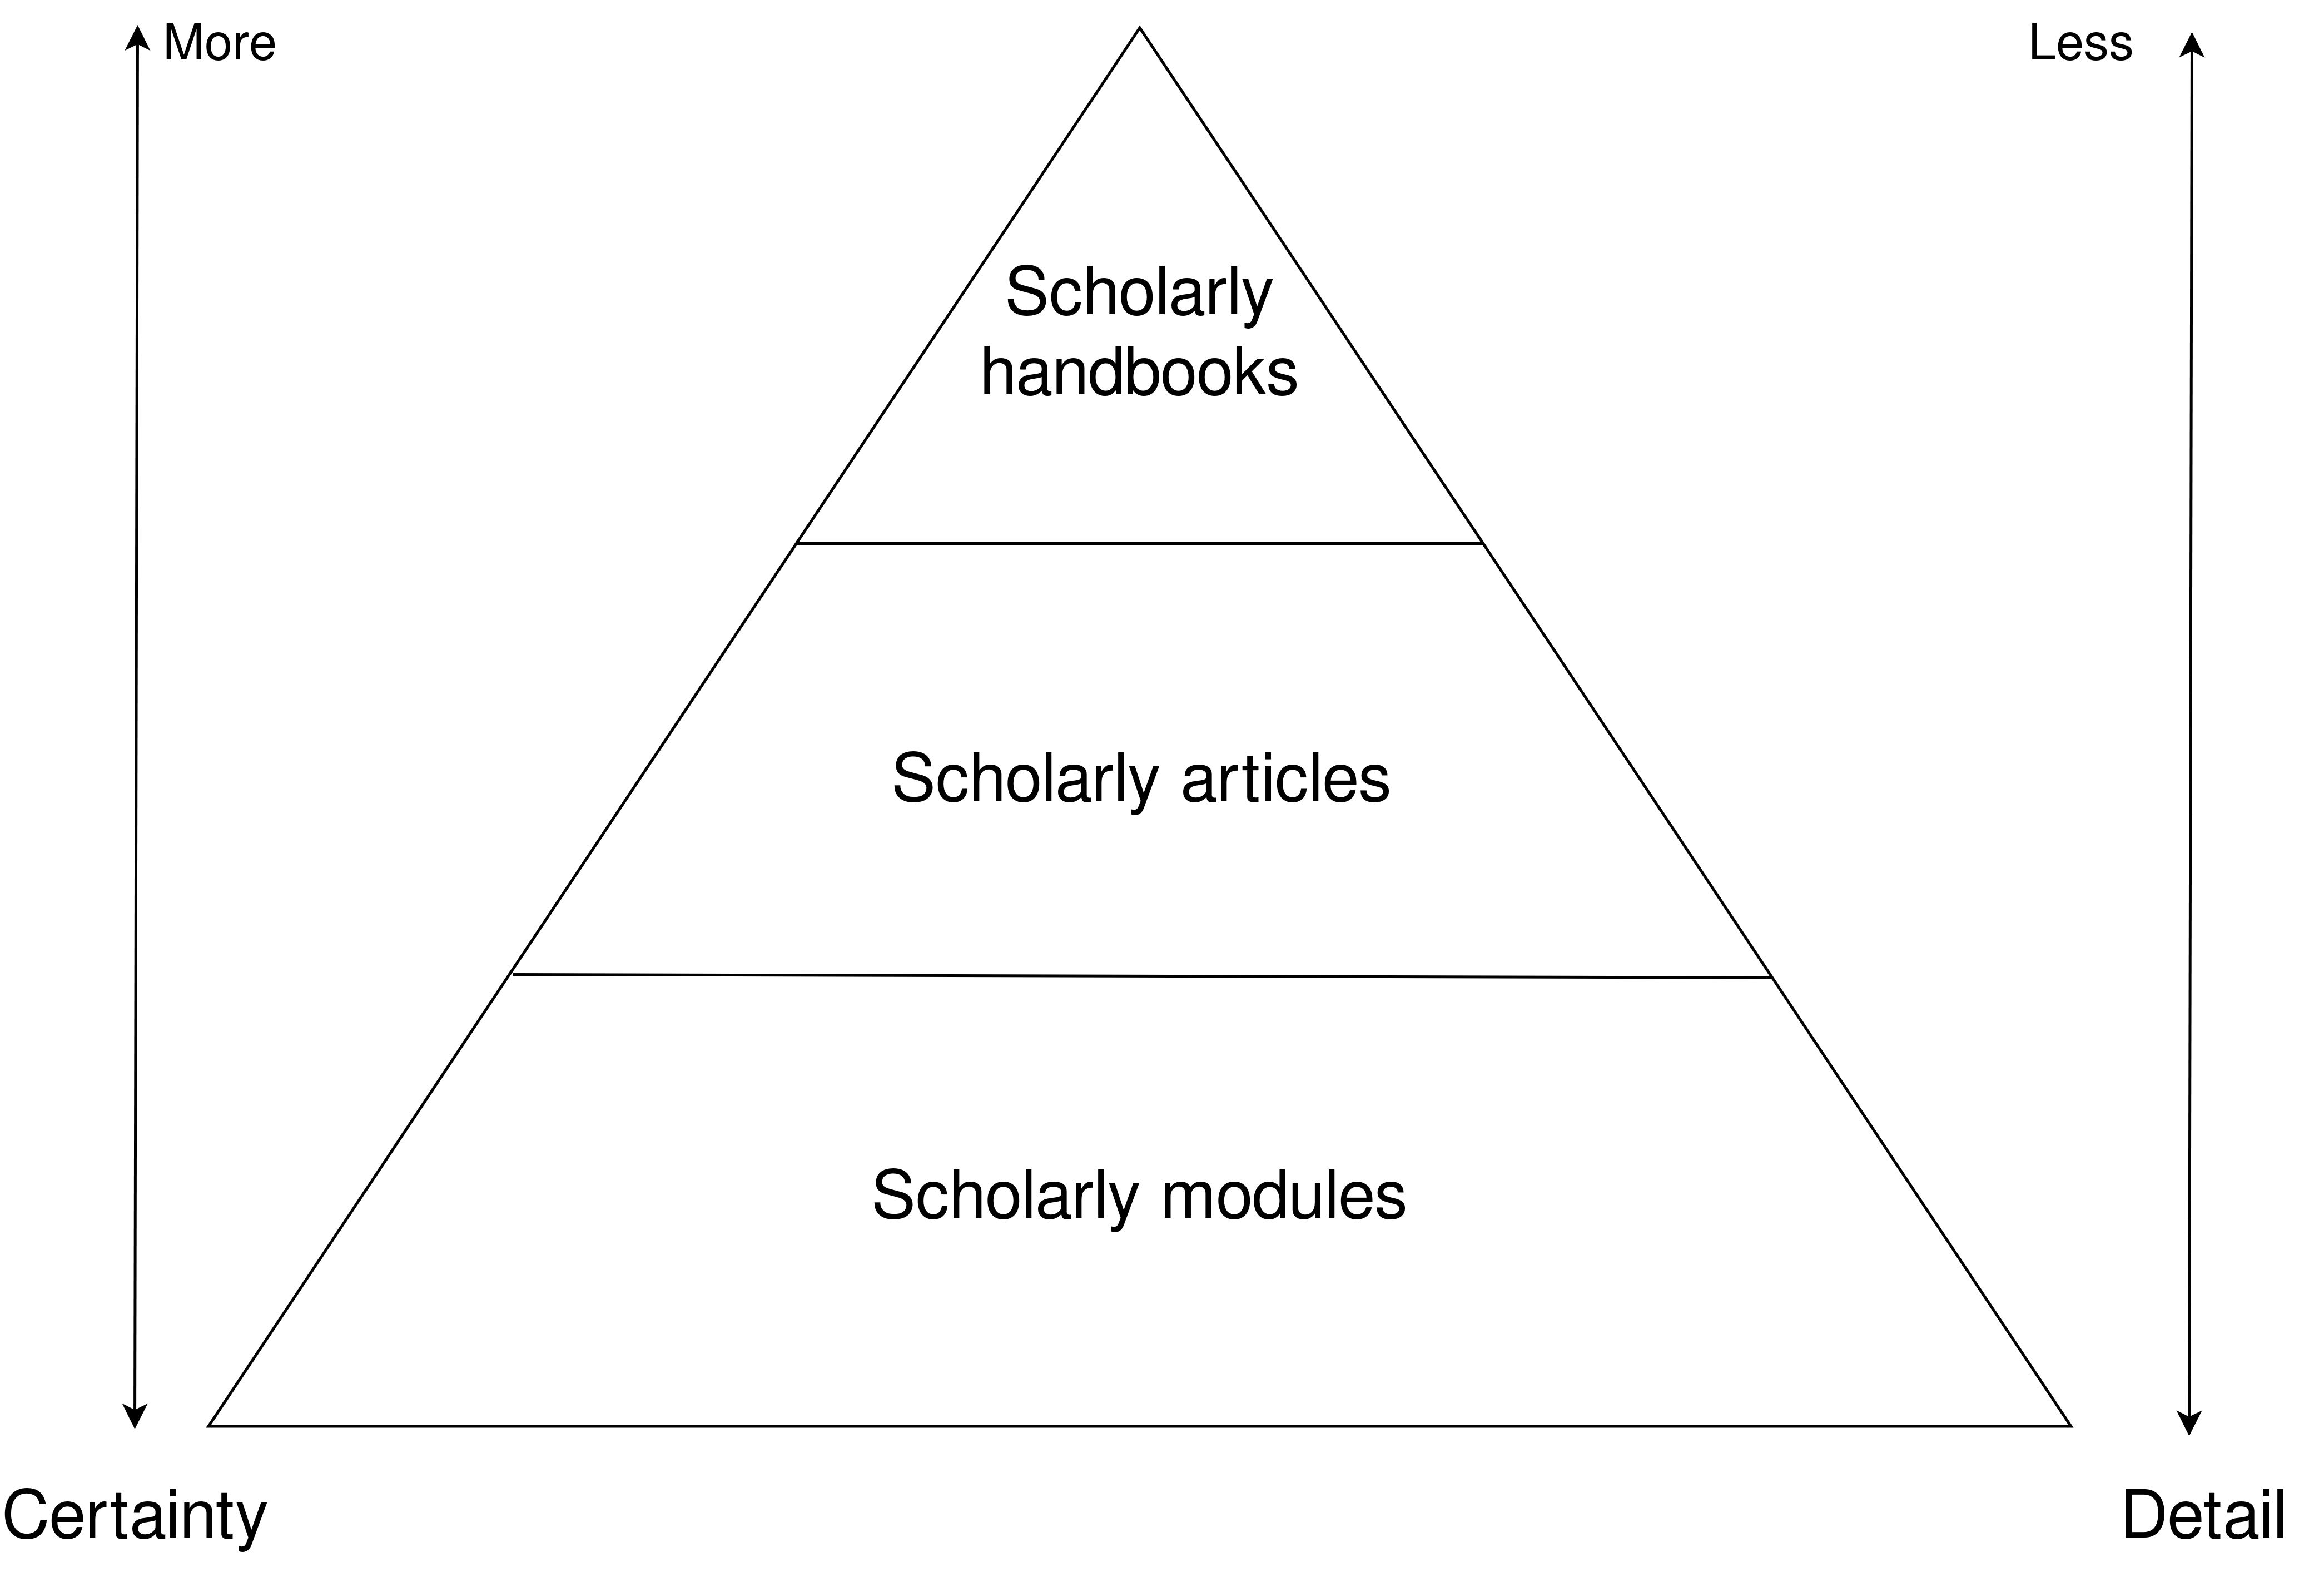 Conceptual depiction of how different forms of scholarly communication relate to each other in both detail and certainty.